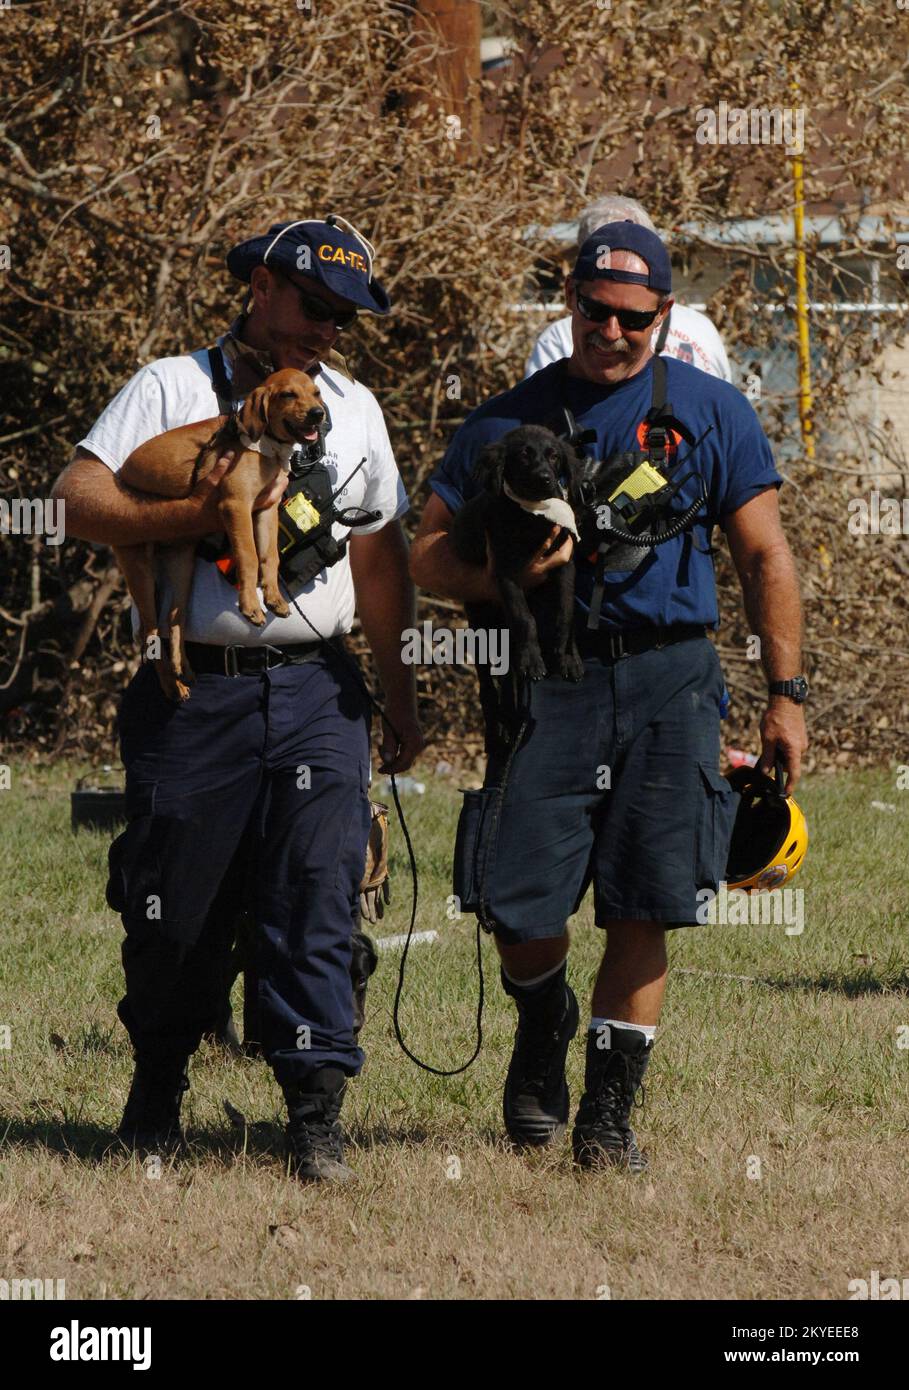 Hurricane Katrina, New Orleans, LA, September 7, 2005 -- A FEMA Urban Search and Rescue member picks up a stranded dog found in areas impacted by Hurricane Katrina where the teams where doing resuce operations. Jocelyn Augustino/FEMA Stock Photo